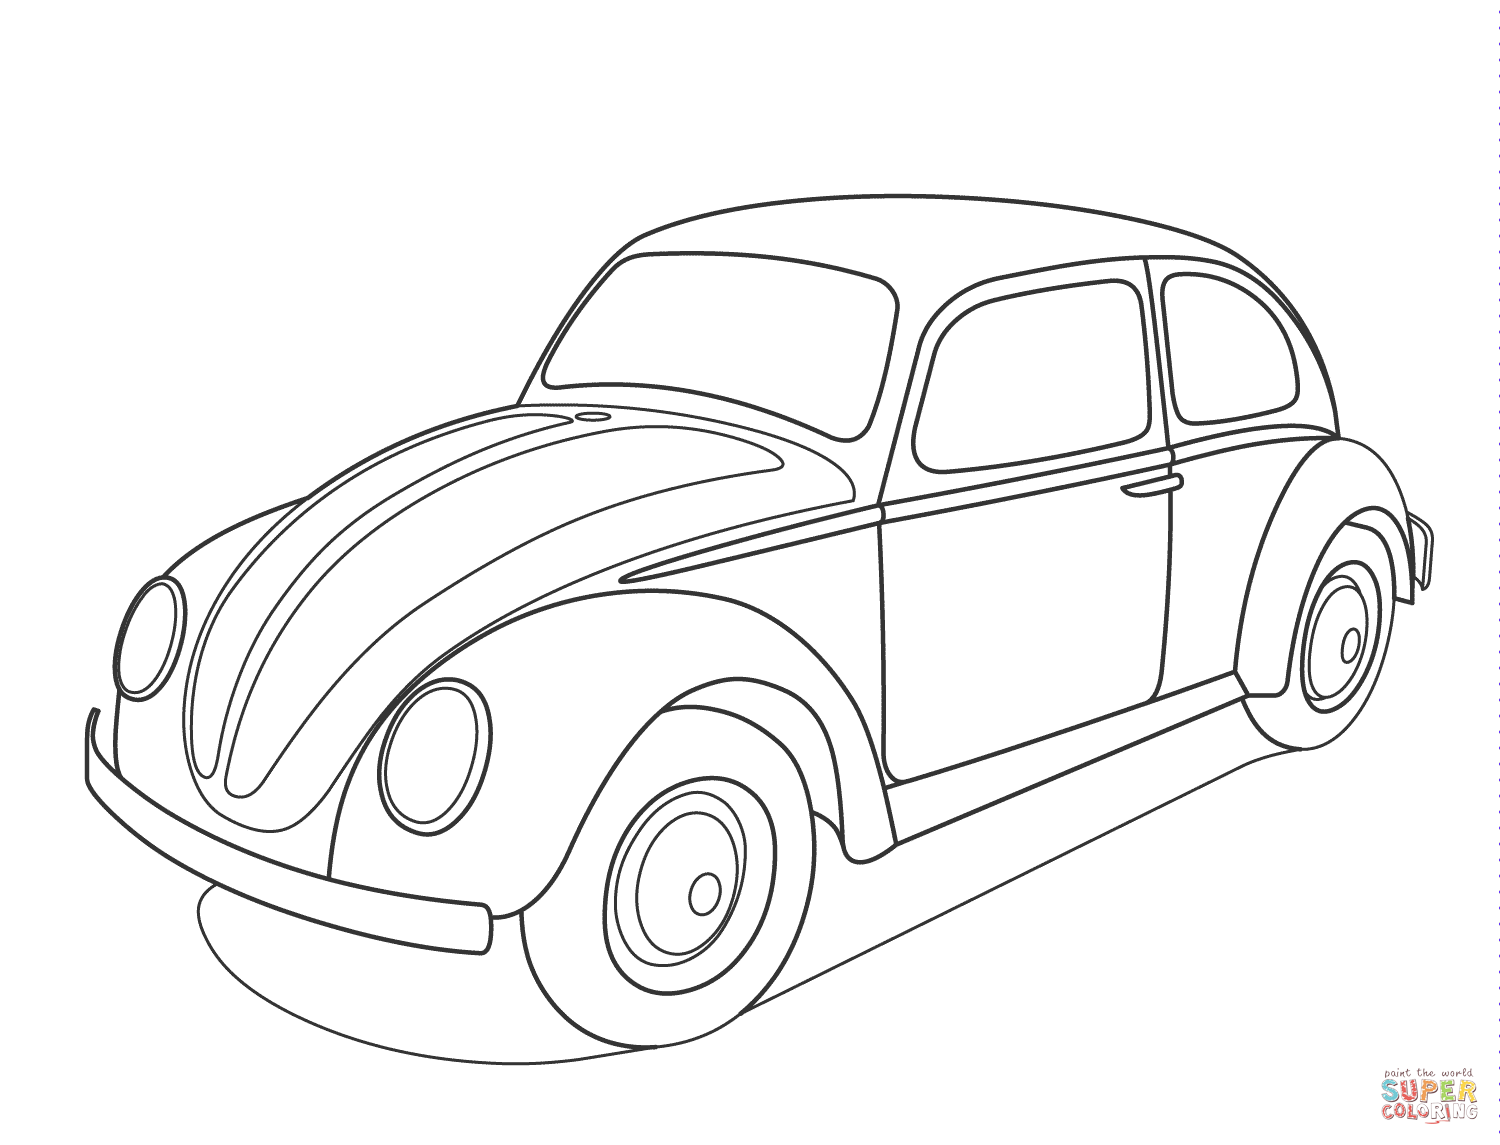 Volkswagen beetle coloring page free printable coloring pages